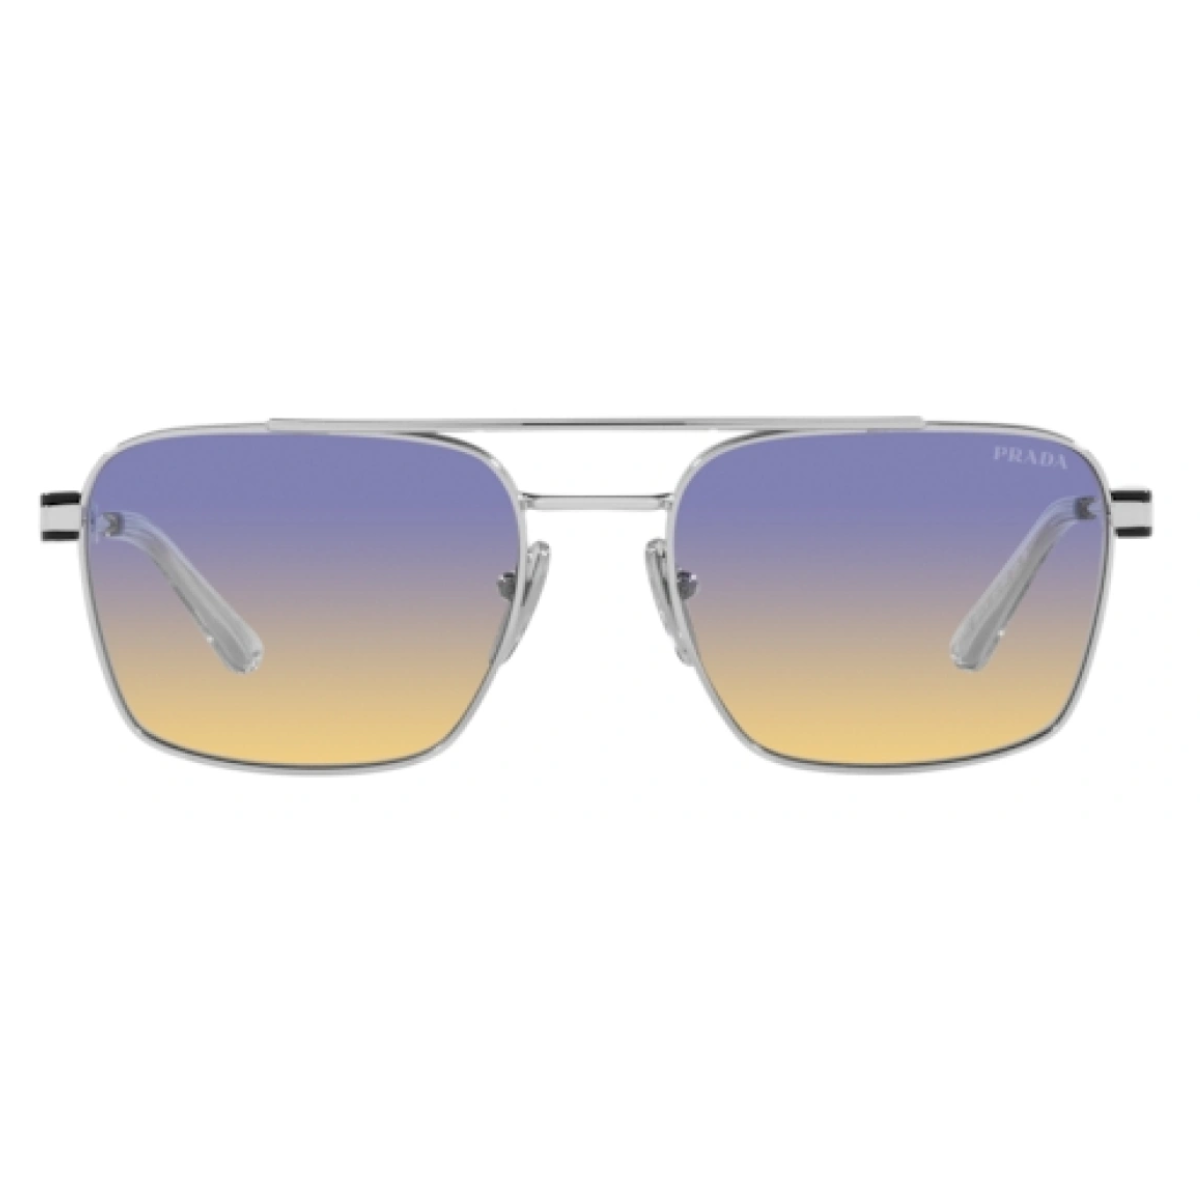 "Shop now for Prada SPR 67ZS 1BCO6Z sunglasses for men at Optorium. Featuring non-polarized blue and yellow gradient lenses and sleek silver metal frames, these stylish Prada glasses offer both style and functionality."